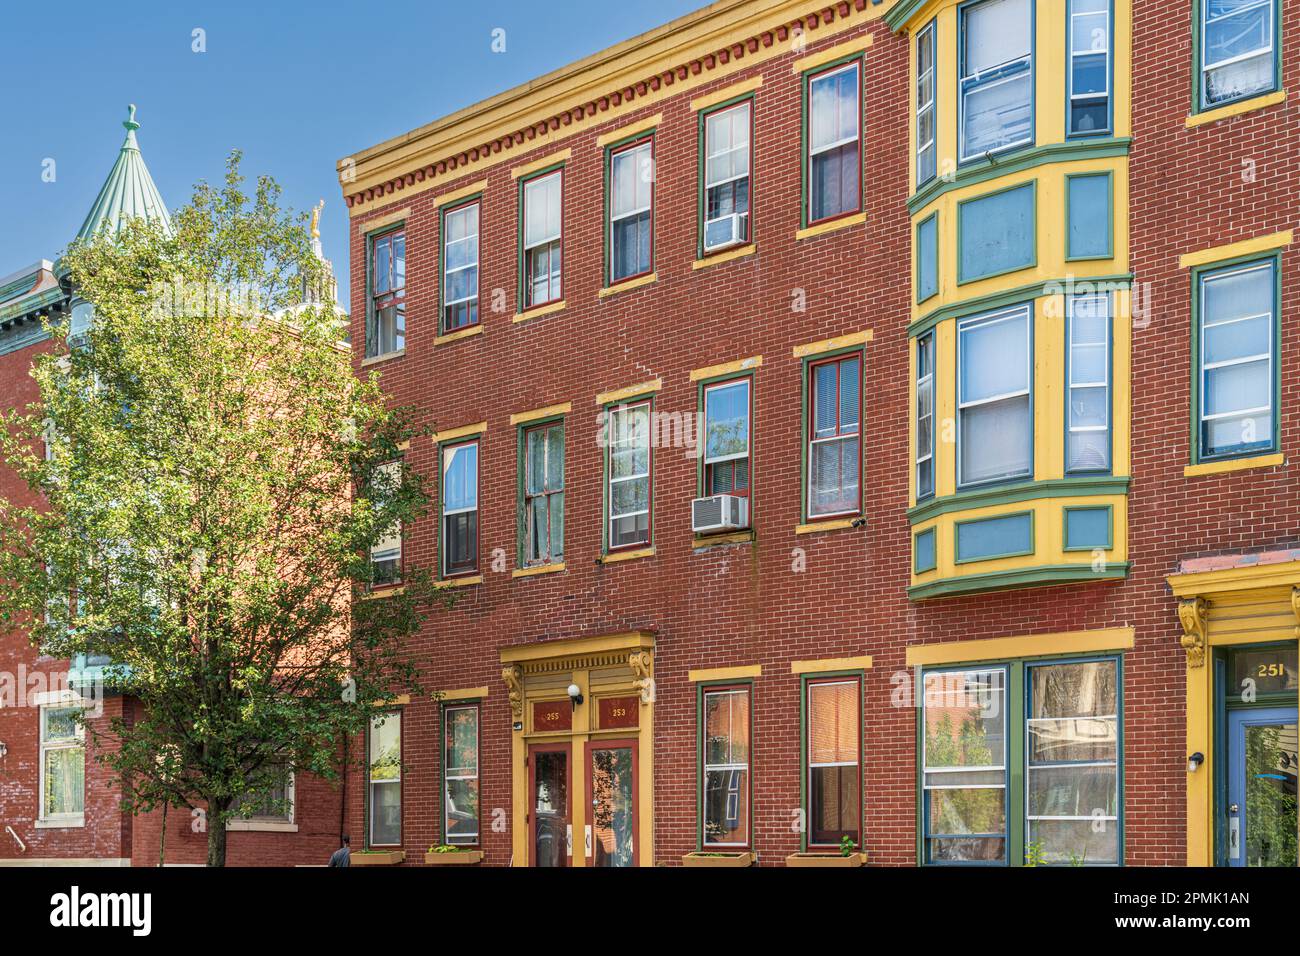 Harrisburg, PA - September 26, 2021: Typical quaint red brick row houses in a city neighborhood in Harrisburg, the capital of Pennsylvania, USA. Stock Photo